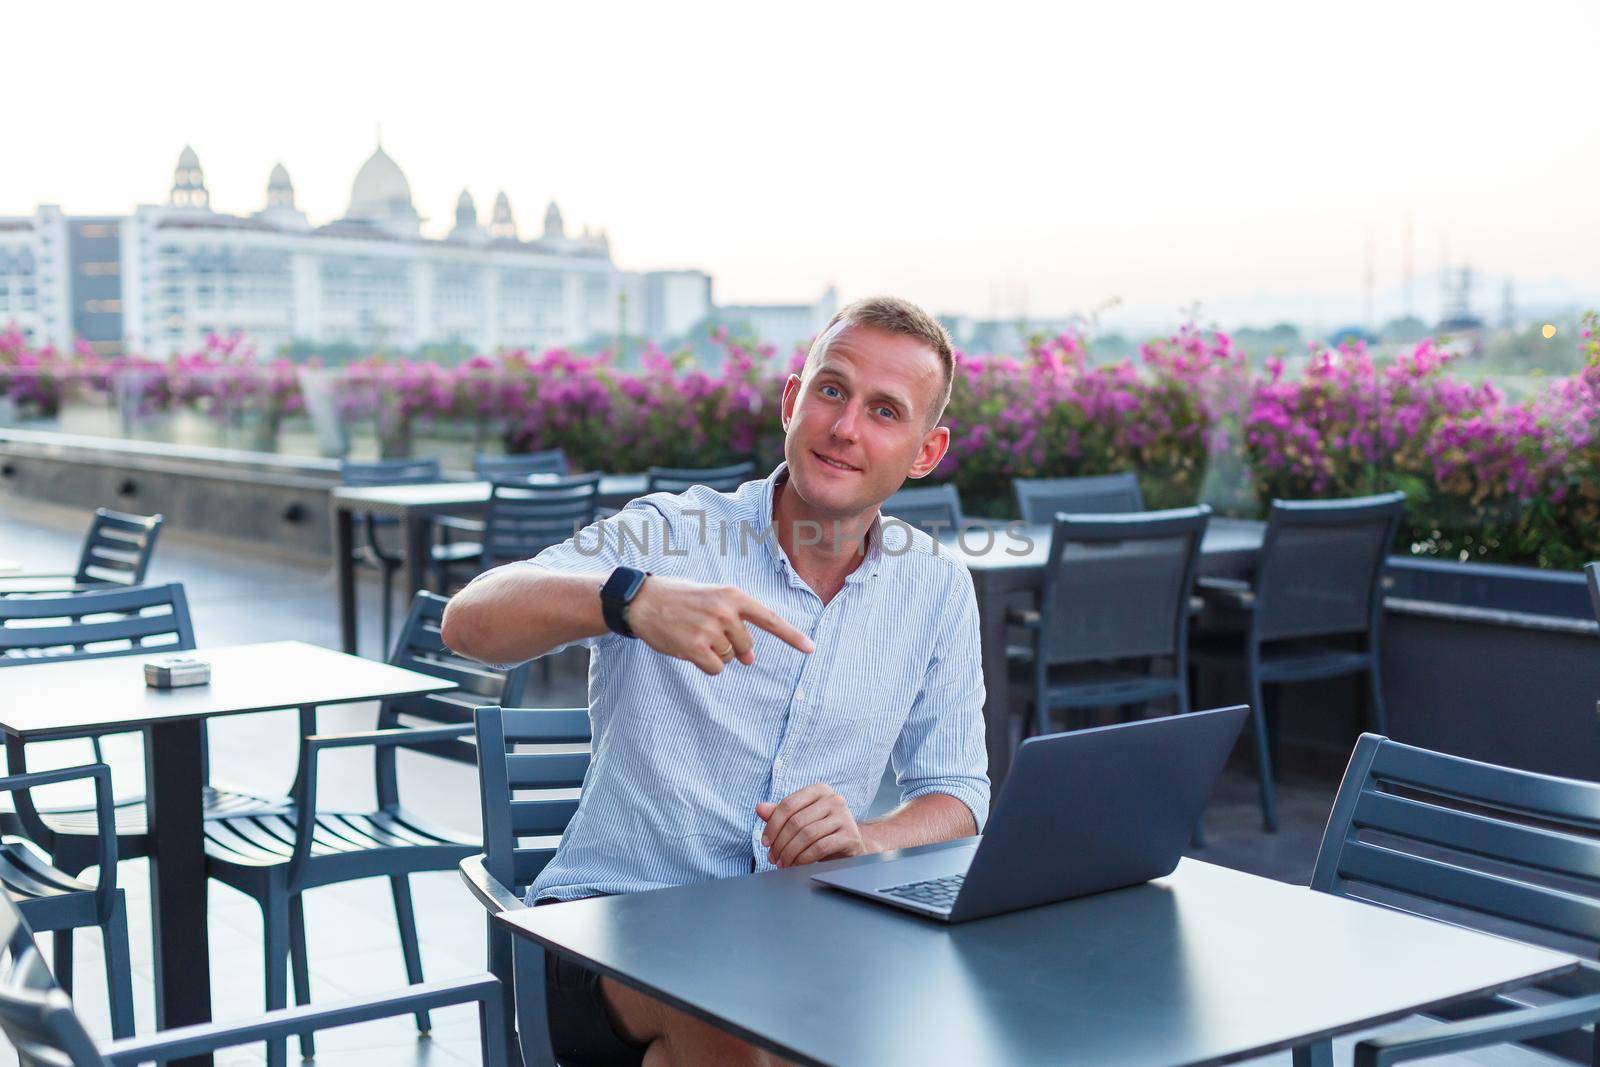 Successful young executive looking while sitting at a table with a laptop on a hotel terrace and finding time for remote control of employees while on vacation in an exotic resort